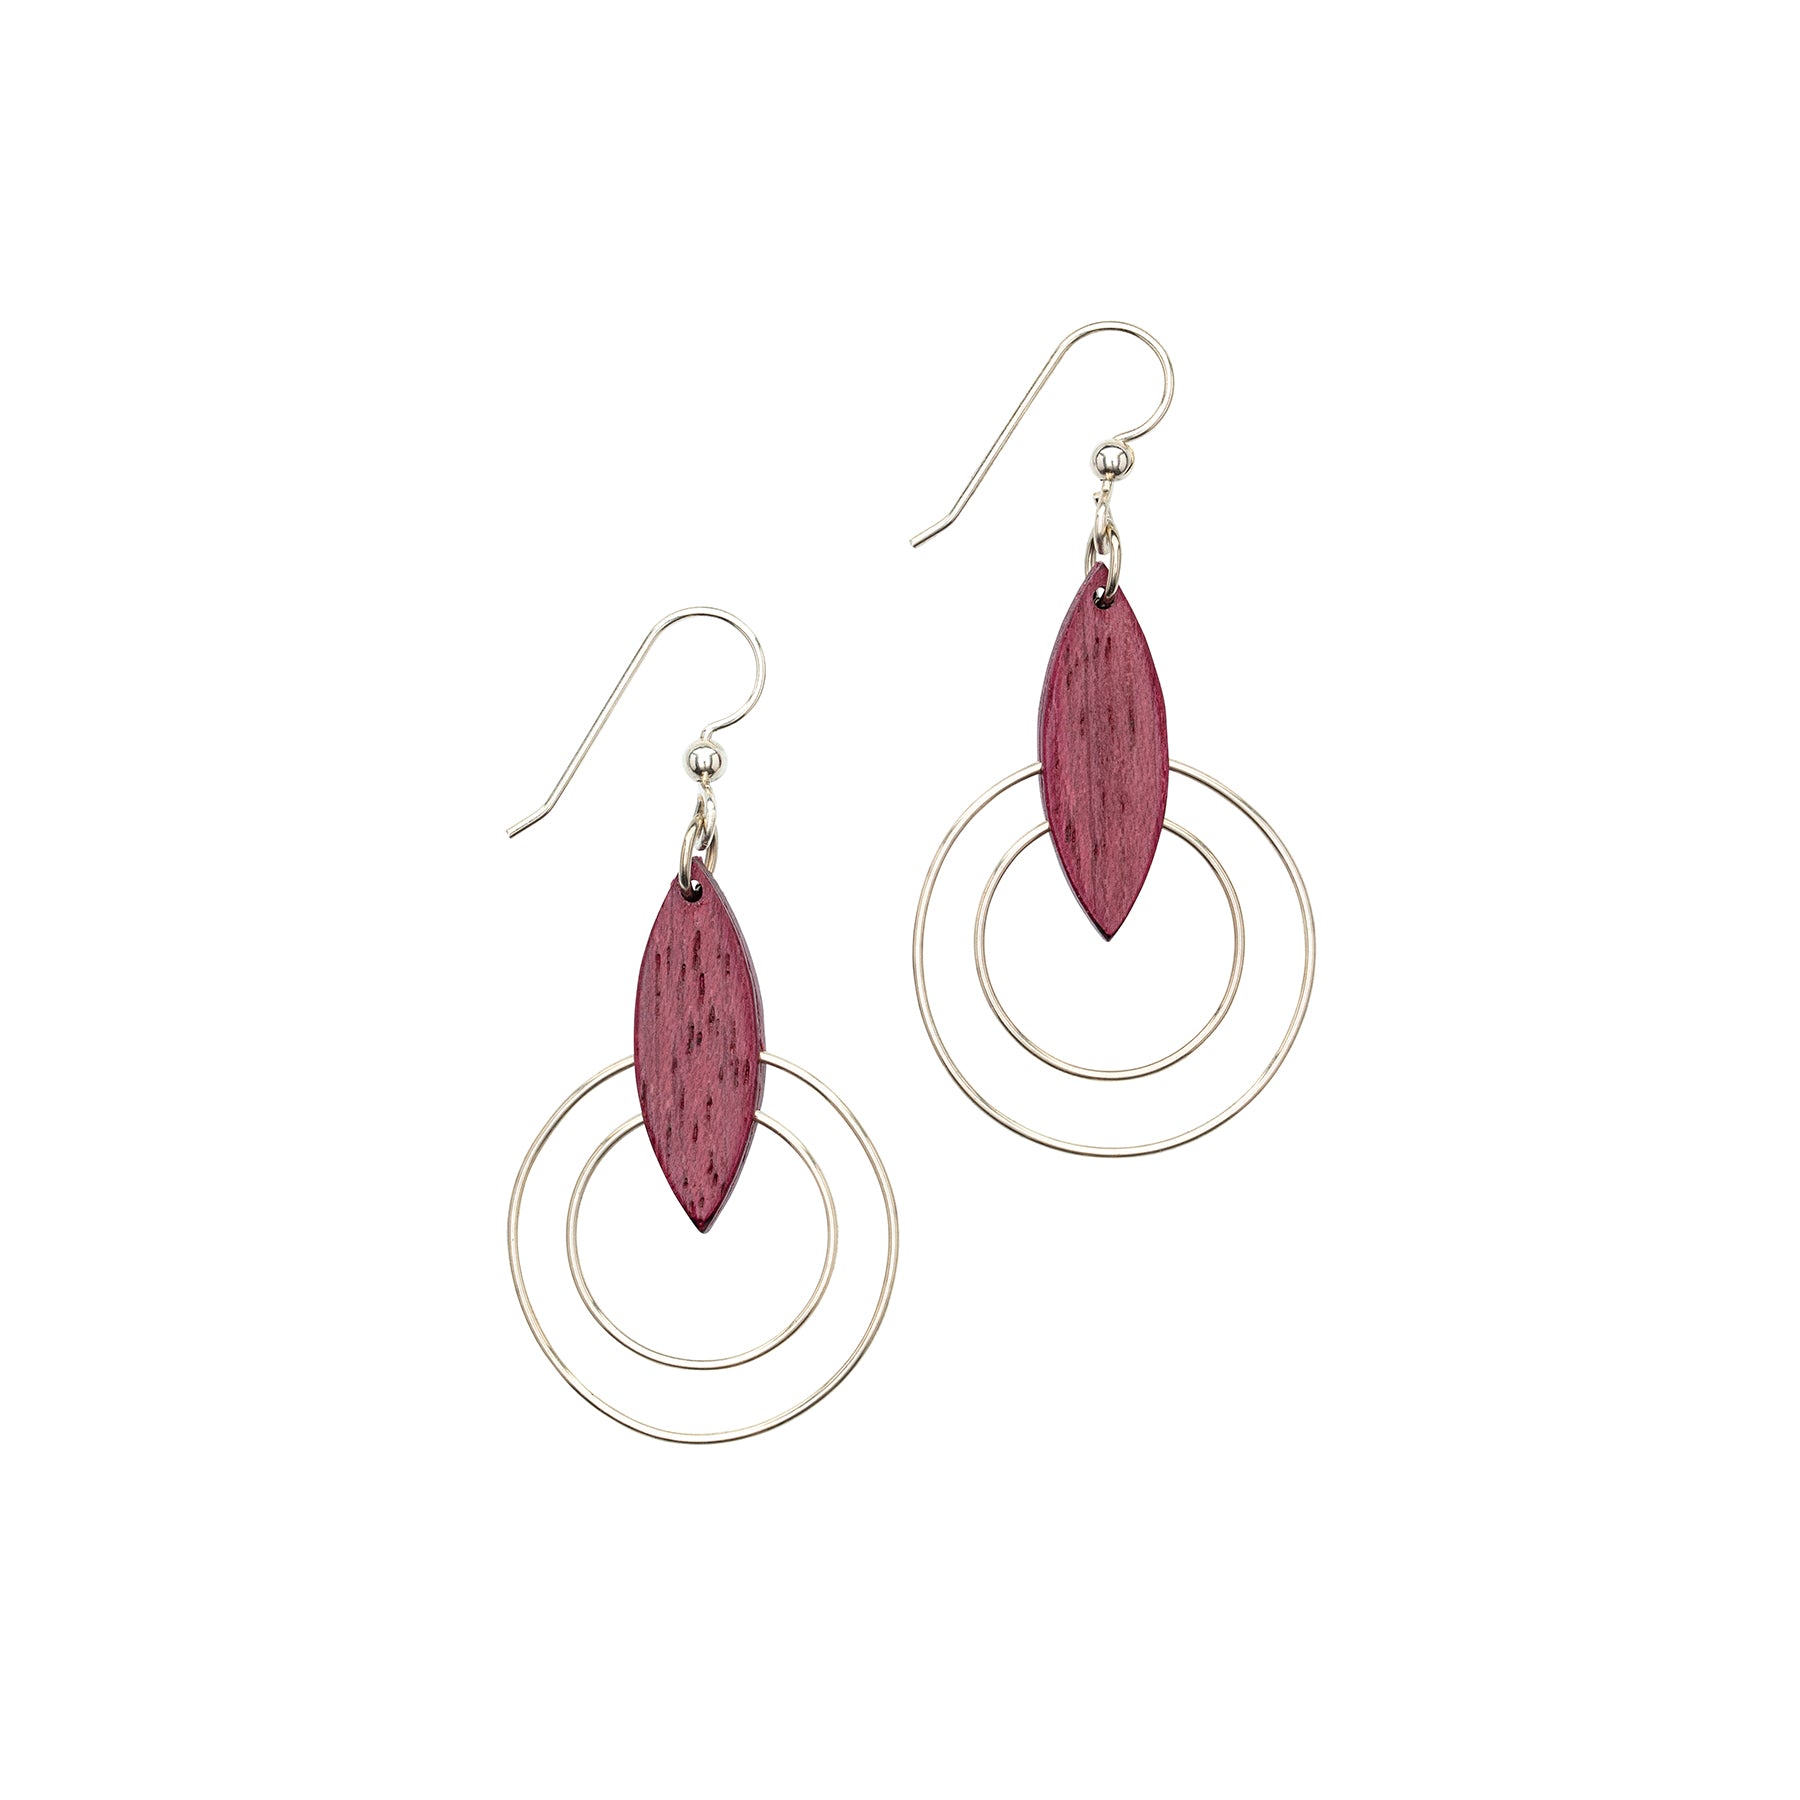 Purple heart and silver double ring earrings